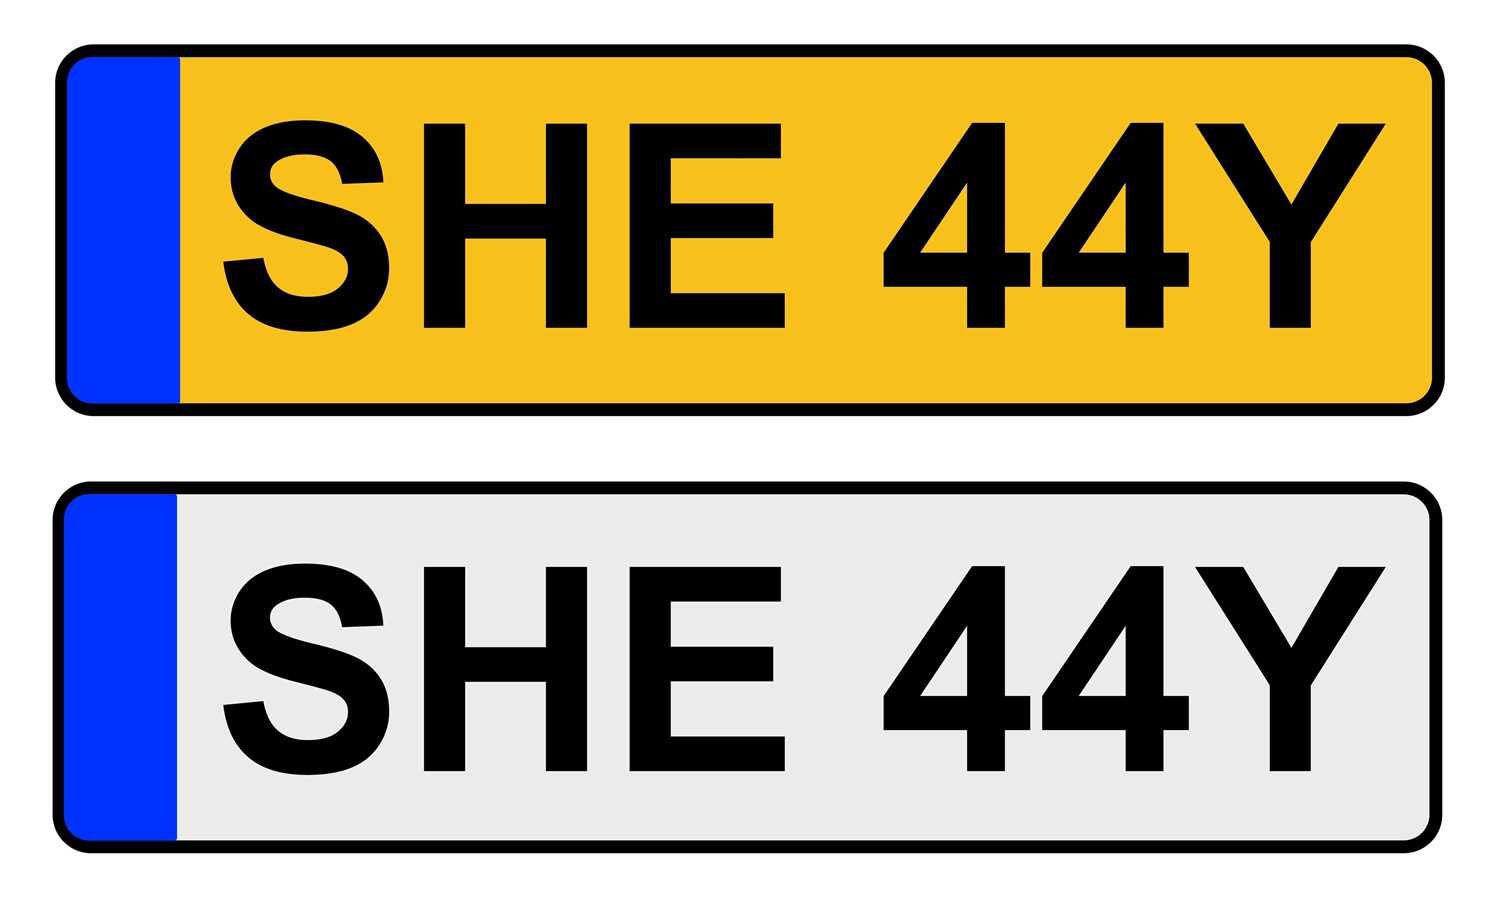 Lot 257 - Cherished Registration Number SHE 44Y, with...